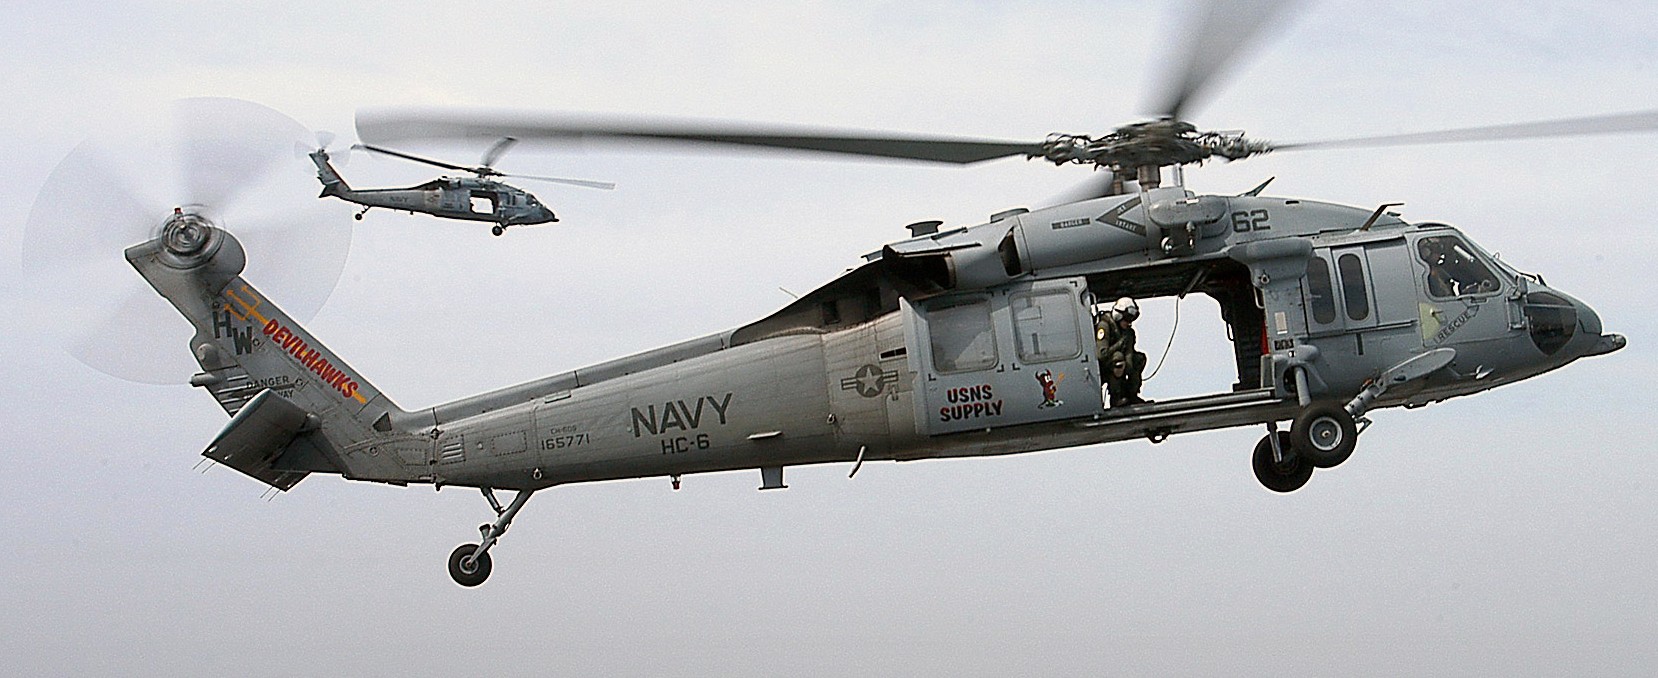 hc-6 chargers helicopter combat support squadron navy mh-60s seahawk 19